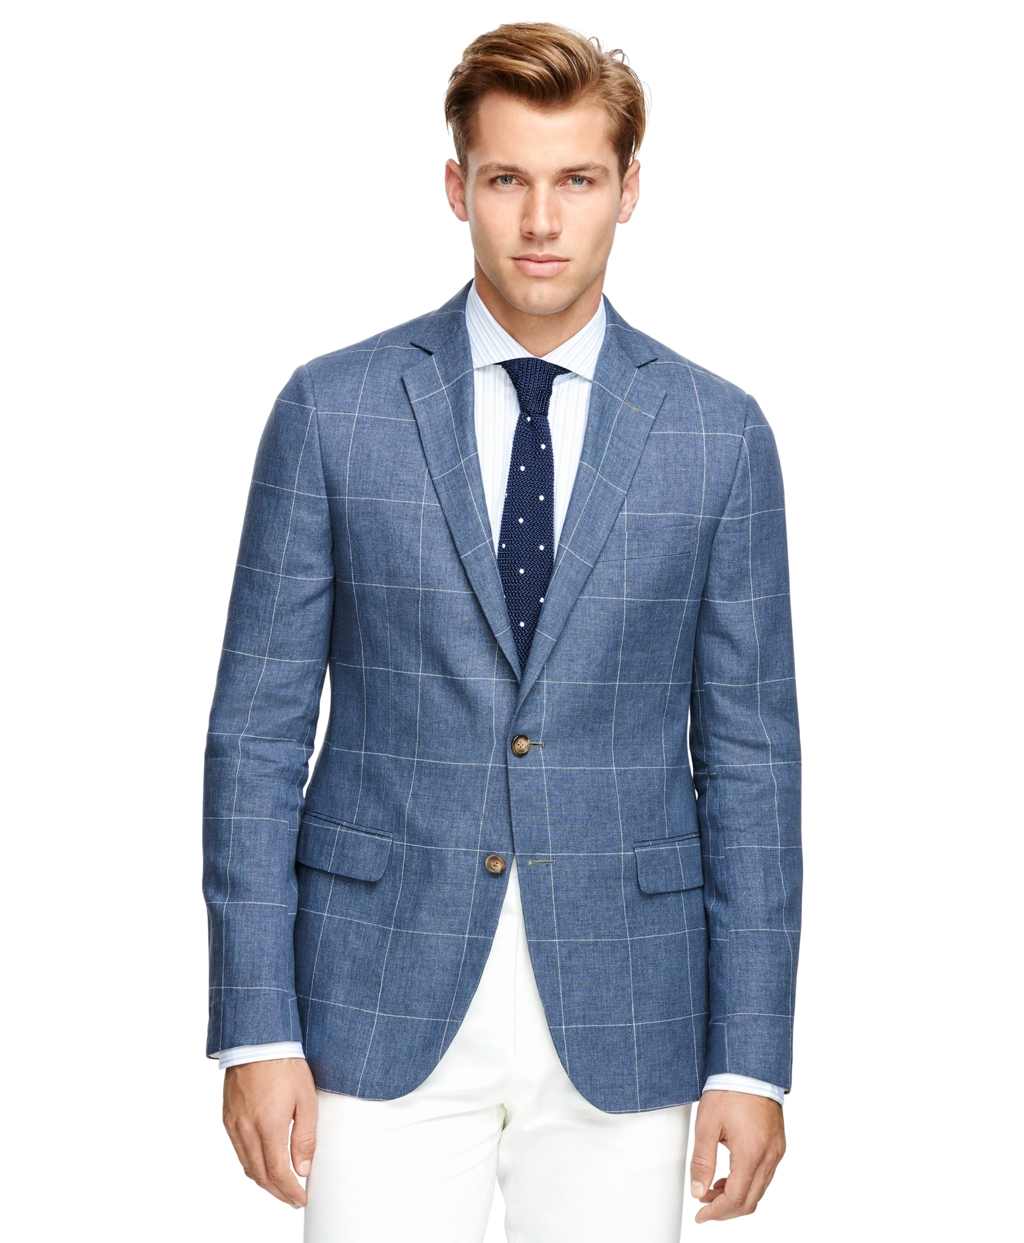 Brooks Brothers Fitzgerald Fit Windowpane Sport Coat in Blue for Men - Lyst